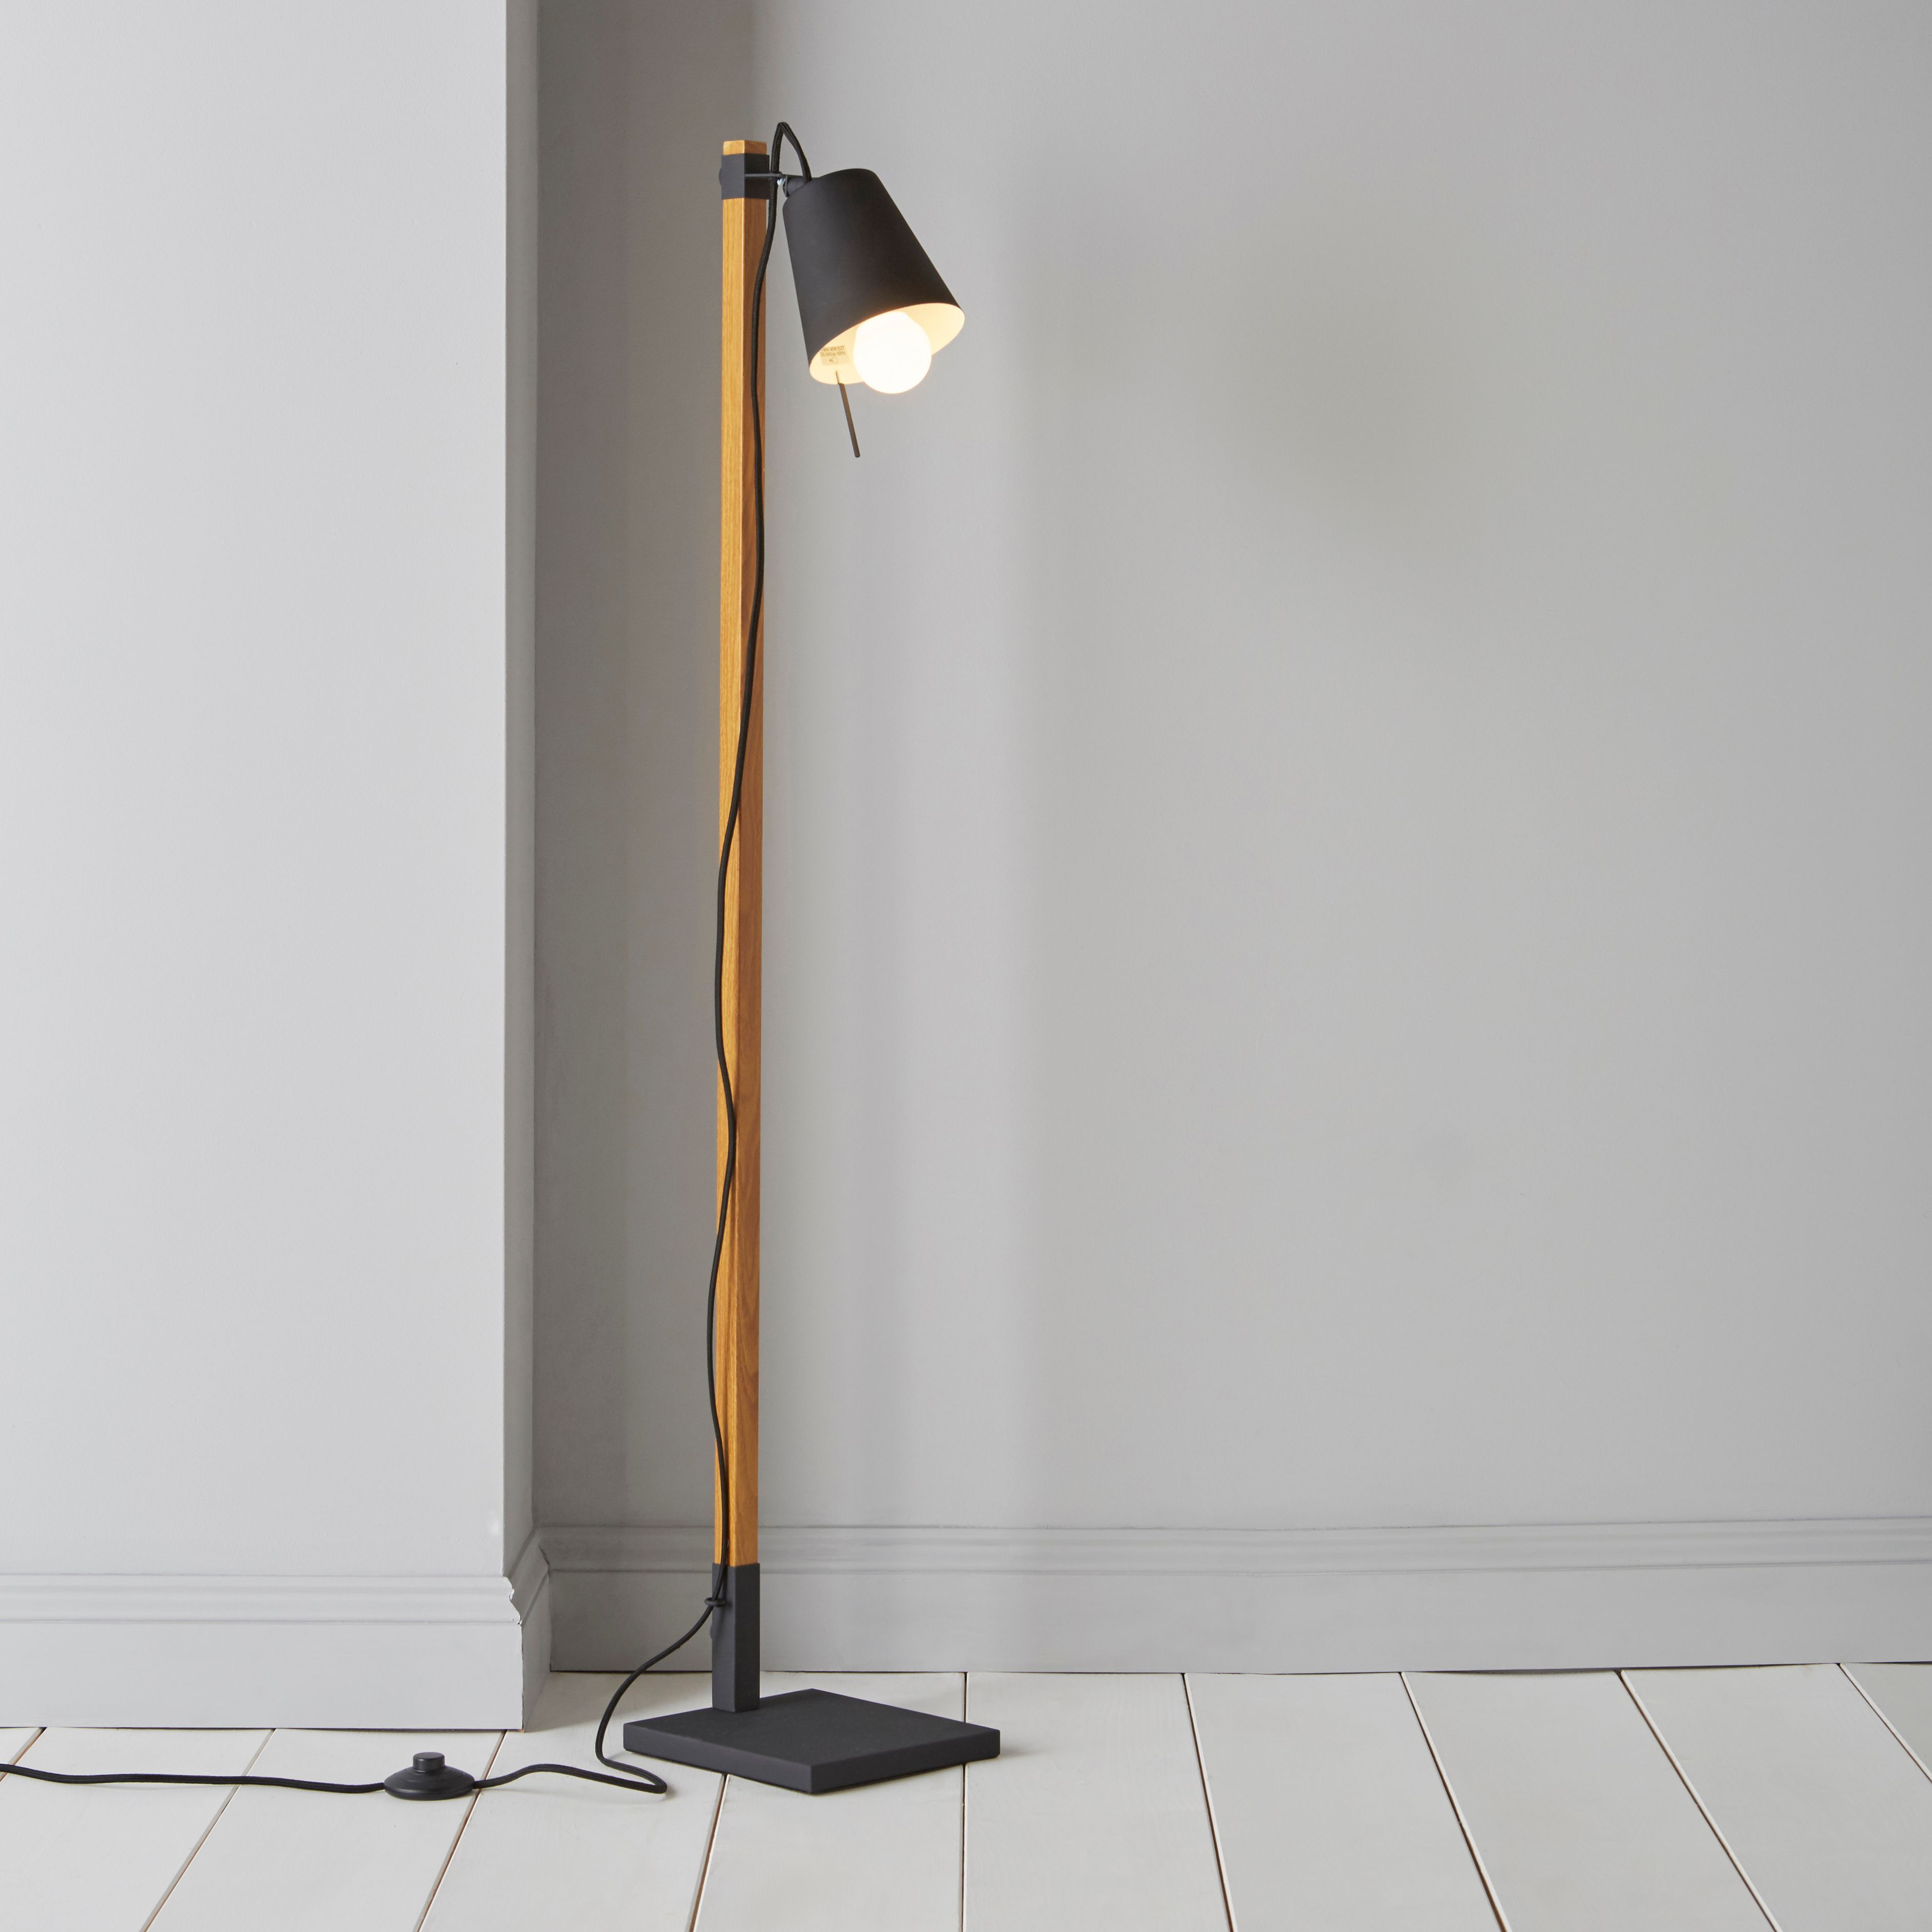 Liber Black Wood Effect Floor Lamp intended for size 3768 X 3768